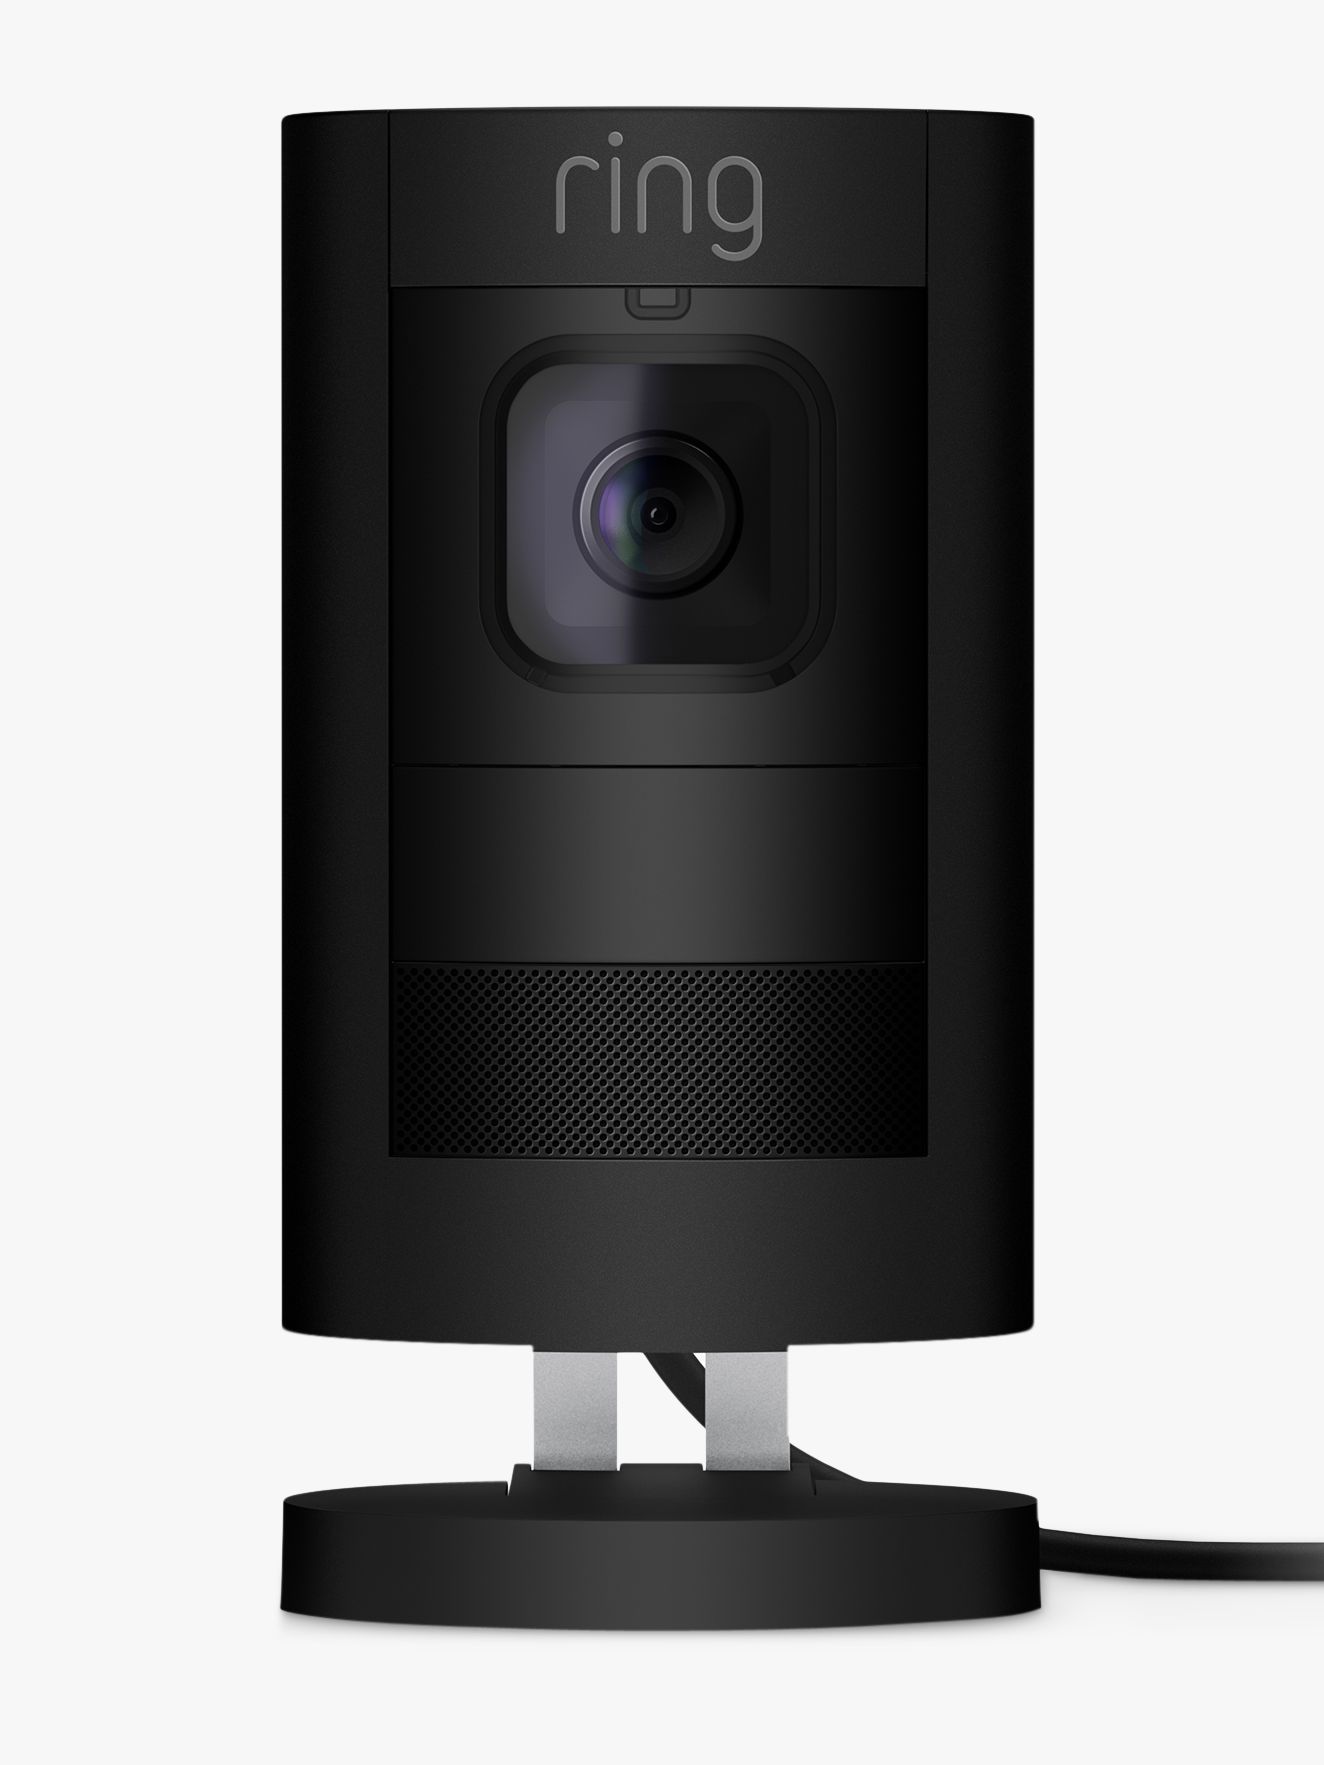 wees stil Ziektecijfers Pelgrim Ring Stick Up Cam Elite Smart Security Camera with Built-in Wi-Fi, Wired